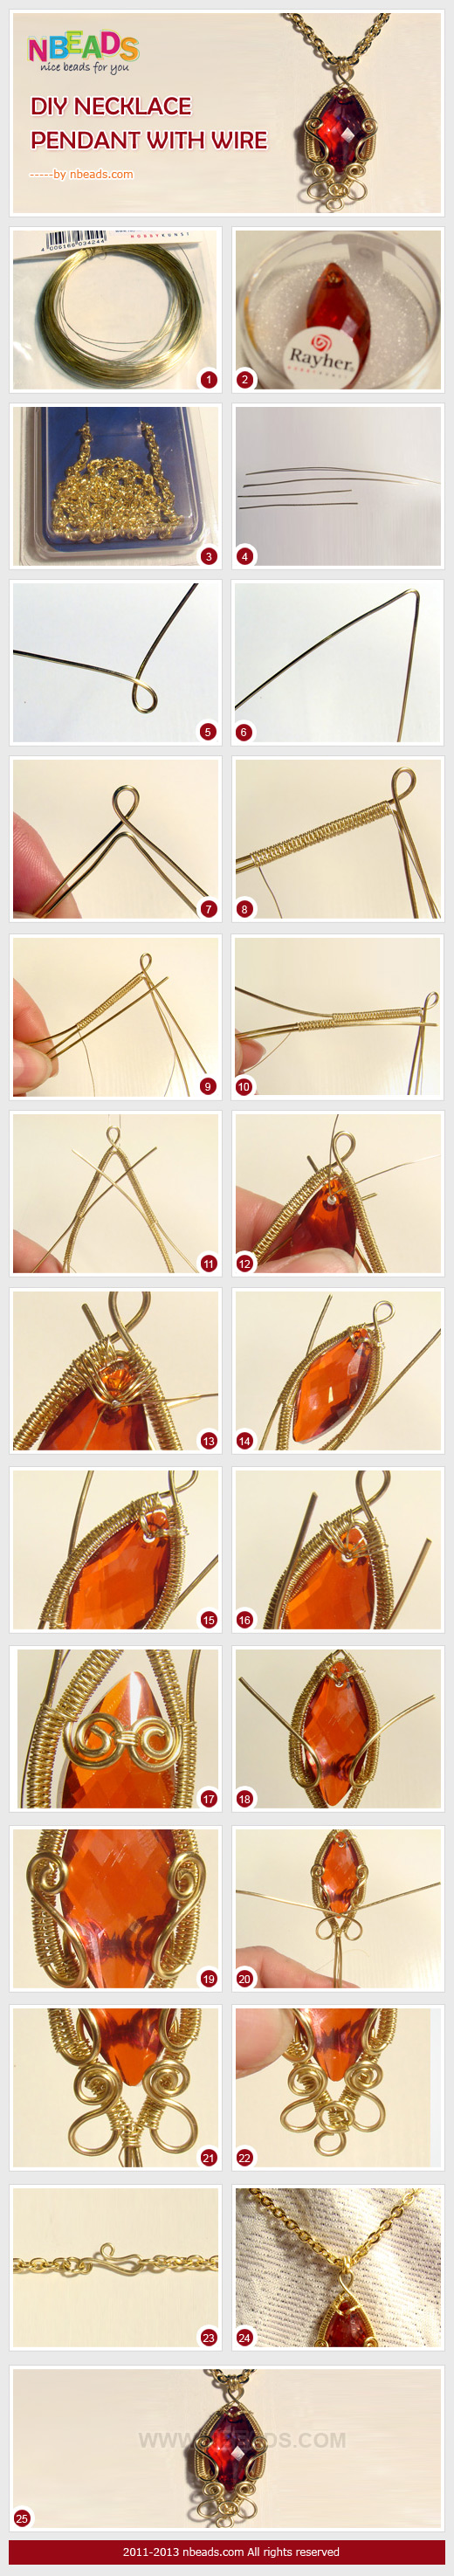 diy necklace pendant with wire